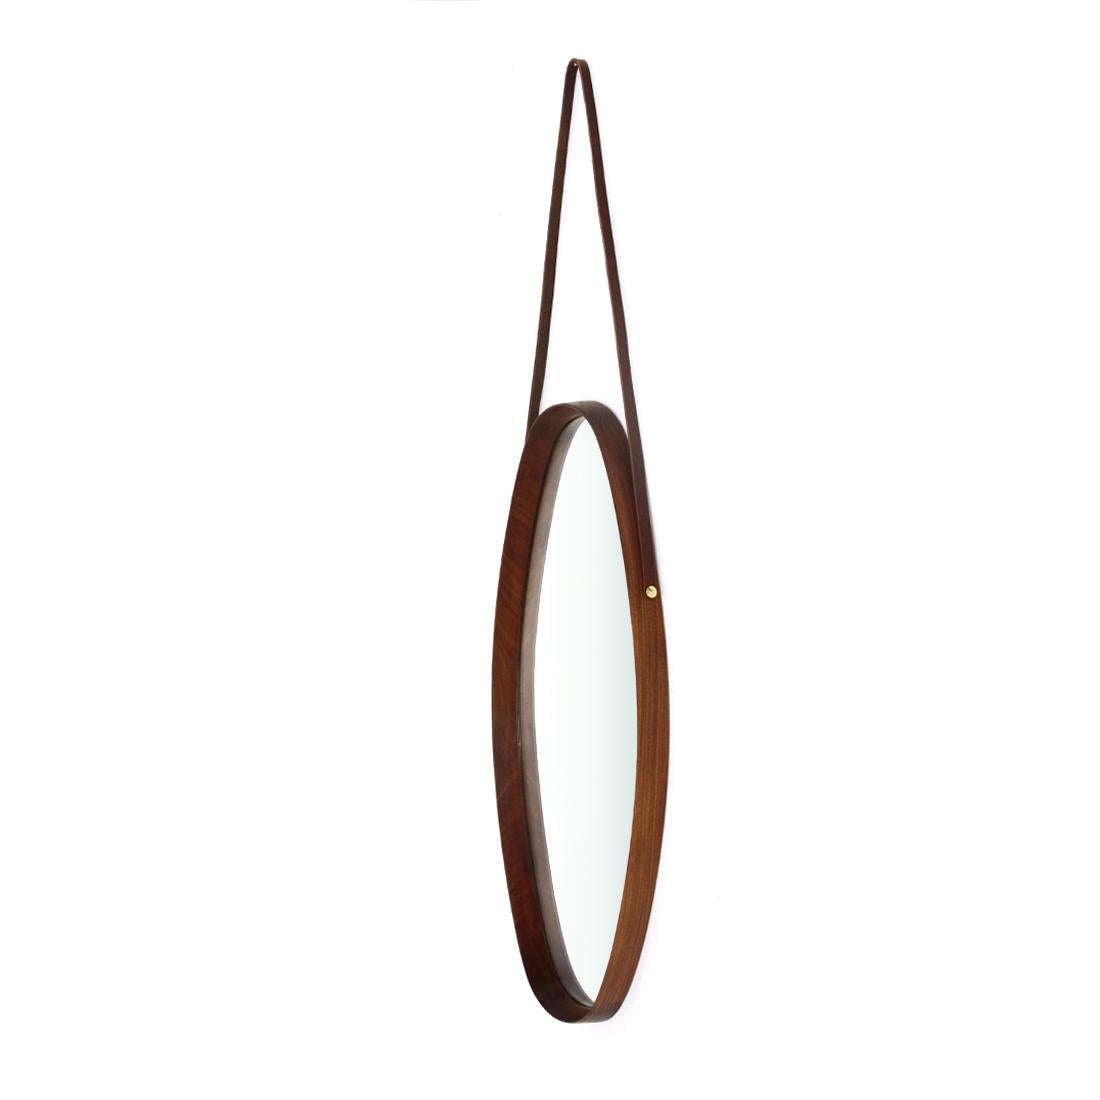 Mirror of Italian manufacture produced in the 1960s.
Oval shaped teak wood frame.
Mirrored glass surface.
Leather lace with brass studs.
Good general condition, some signs due to normal use over time.
Leather lace replaced with a new